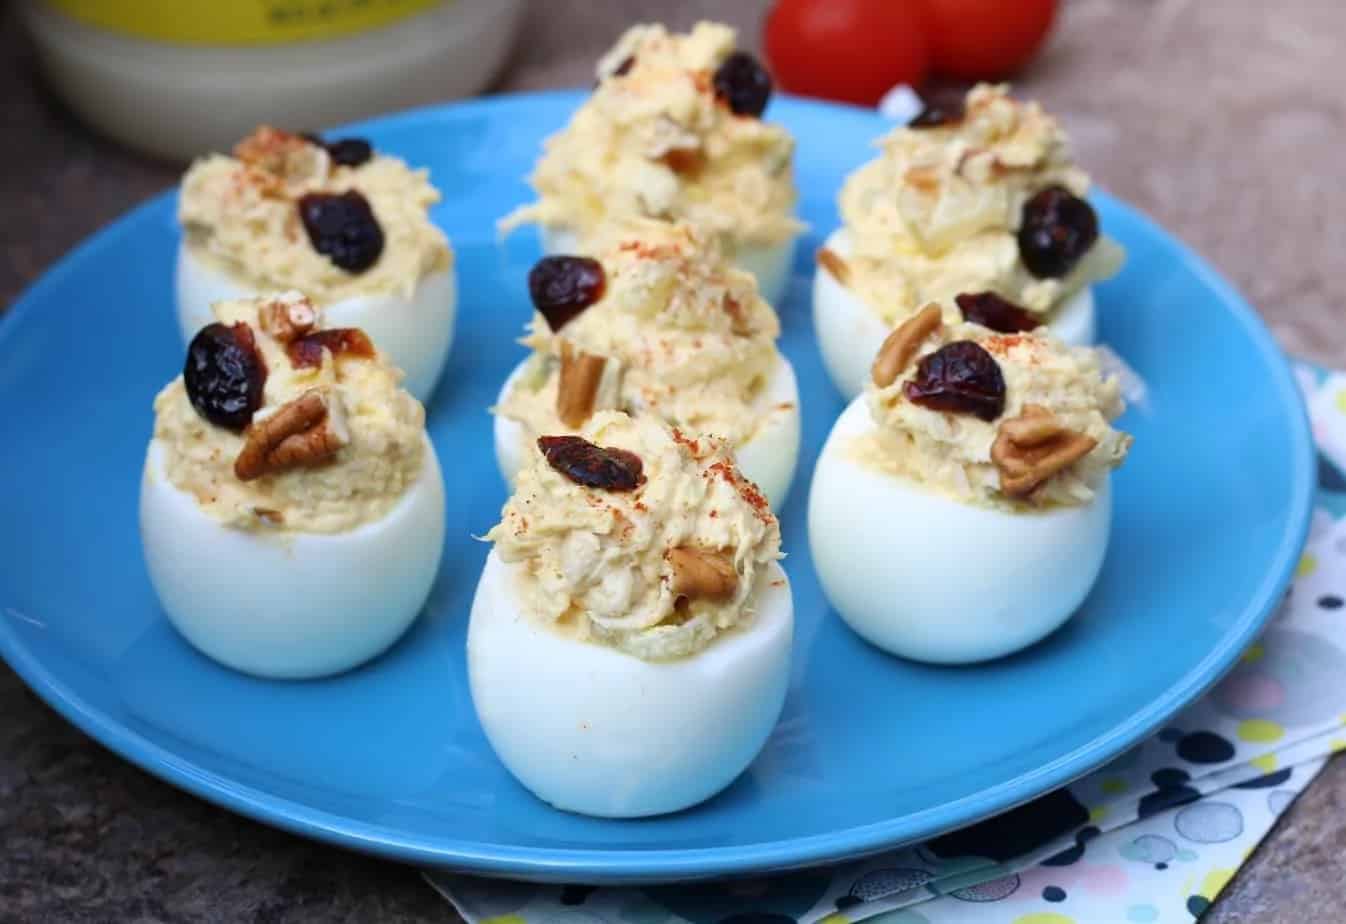 Blue plate with chicken salad deviled eggs.